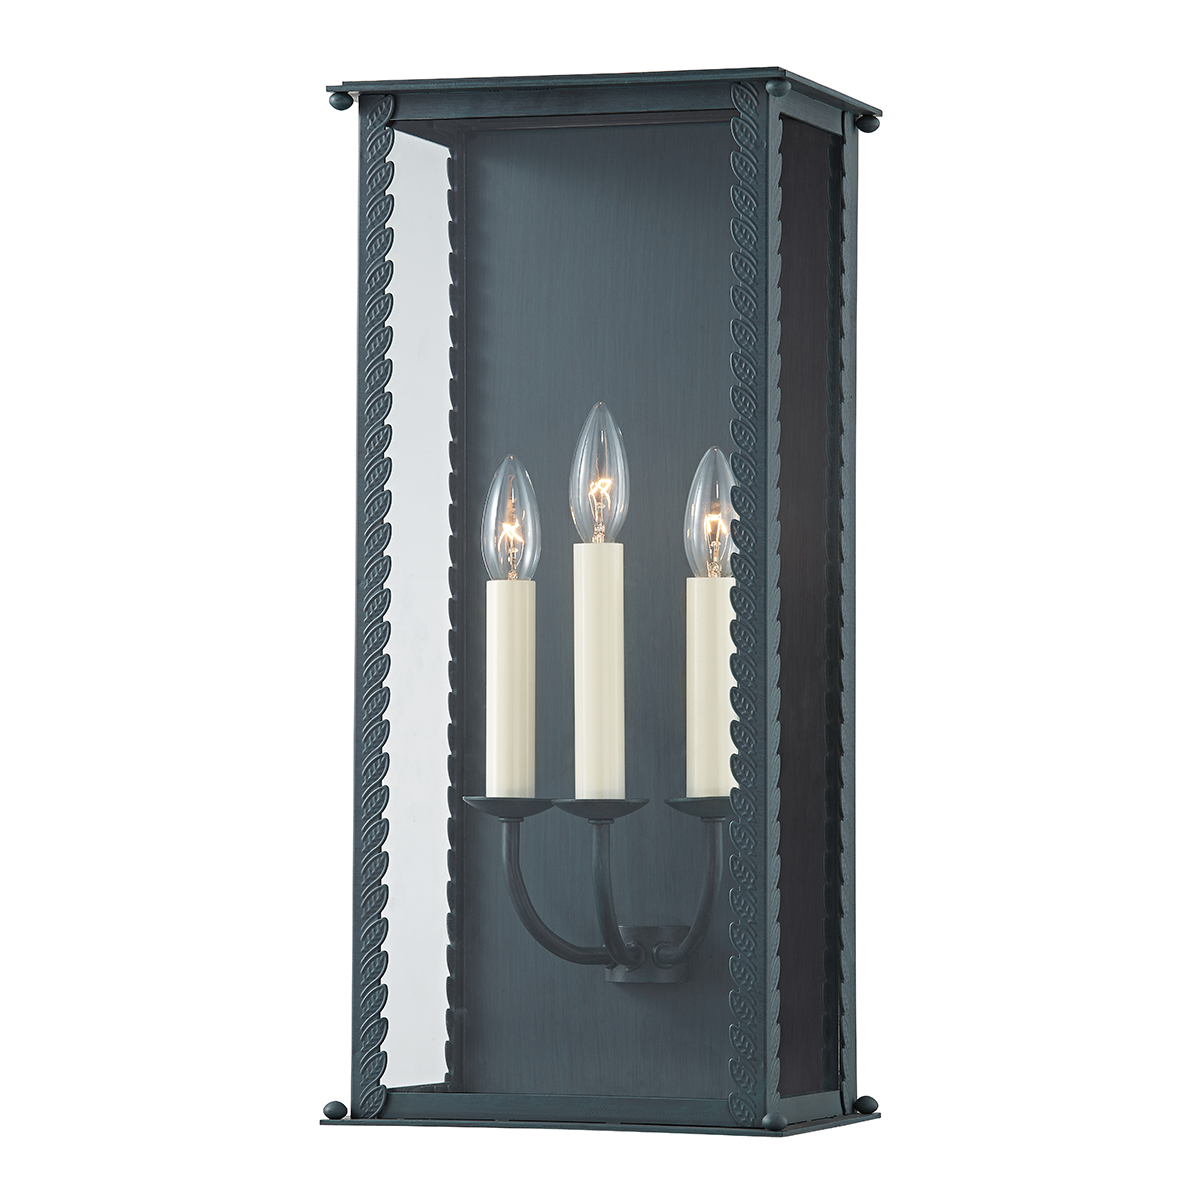 Troy ZUMA 3 LIGHT LARGE EXTERIOR WALL SCONCE B6713 Outdoor l Wall Troy Lighting VERDIGRIS  